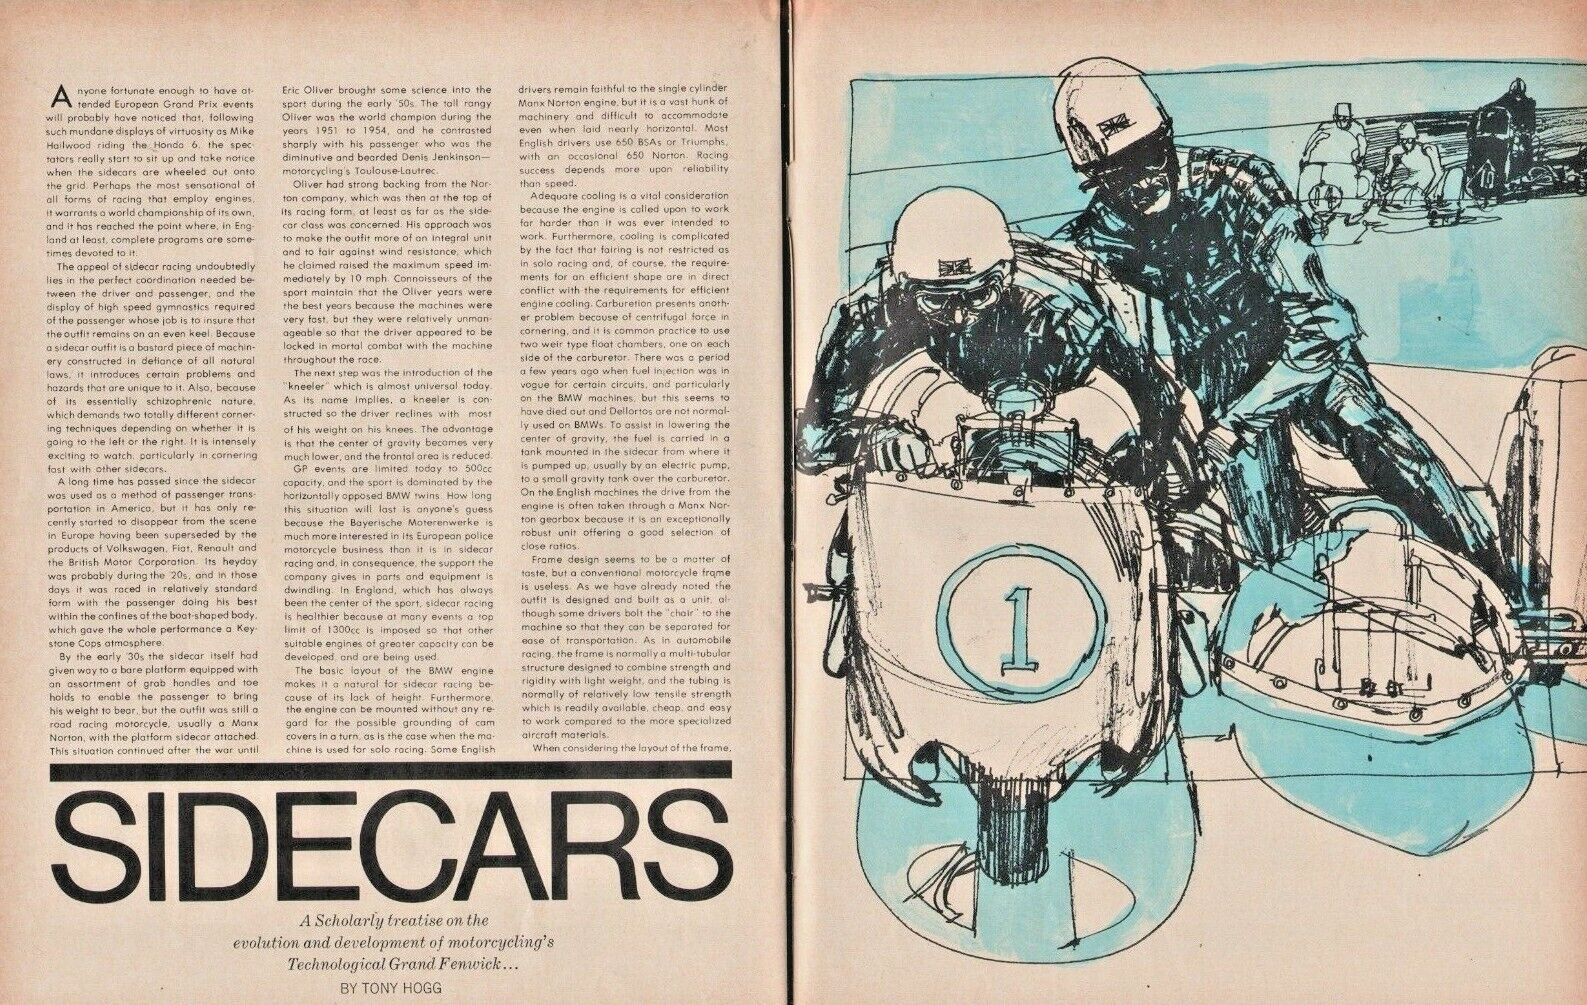 1967 Sidecars - A Scholarly Treatise - 6-page Vintage Motorcycle Article